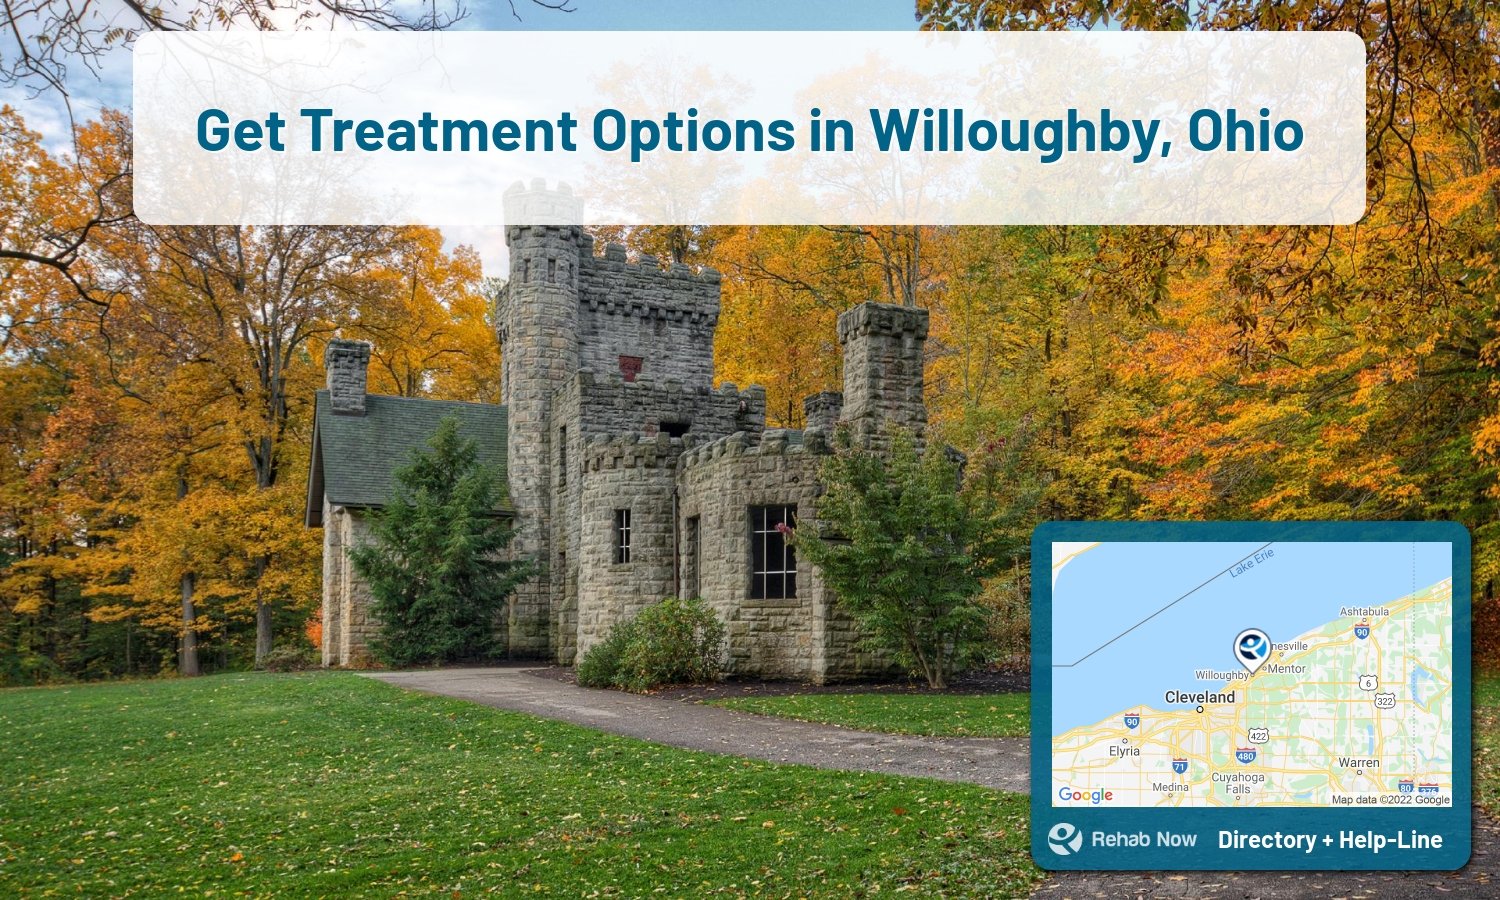 Willoughby, OH Treatment Centers. Find drug rehab in Willoughby, Ohio, or detox and treatment programs. Get the right help now!